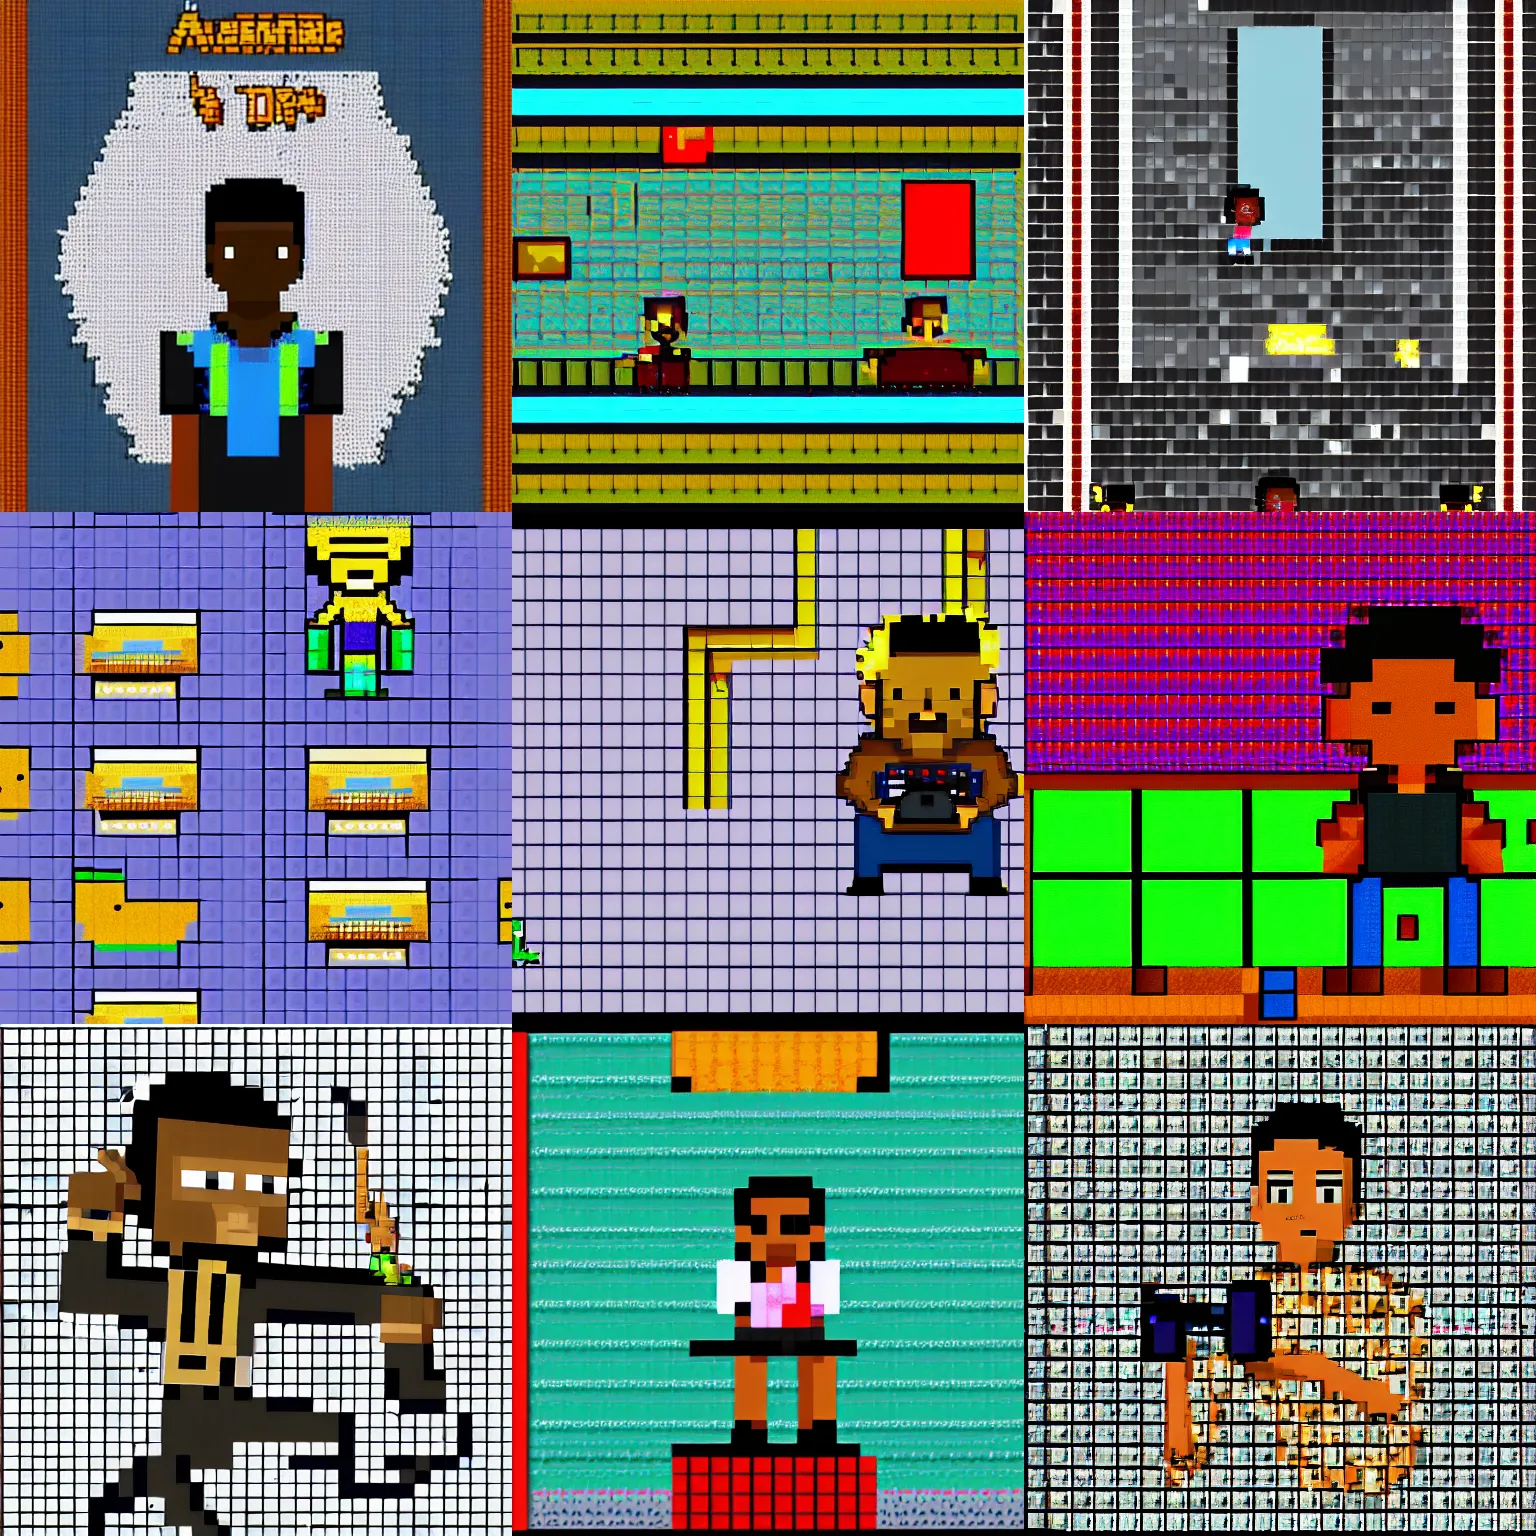 Prompt: a black boy [ { 9 playing video - game in your room!!! ] } ), absurdly, pixel art style